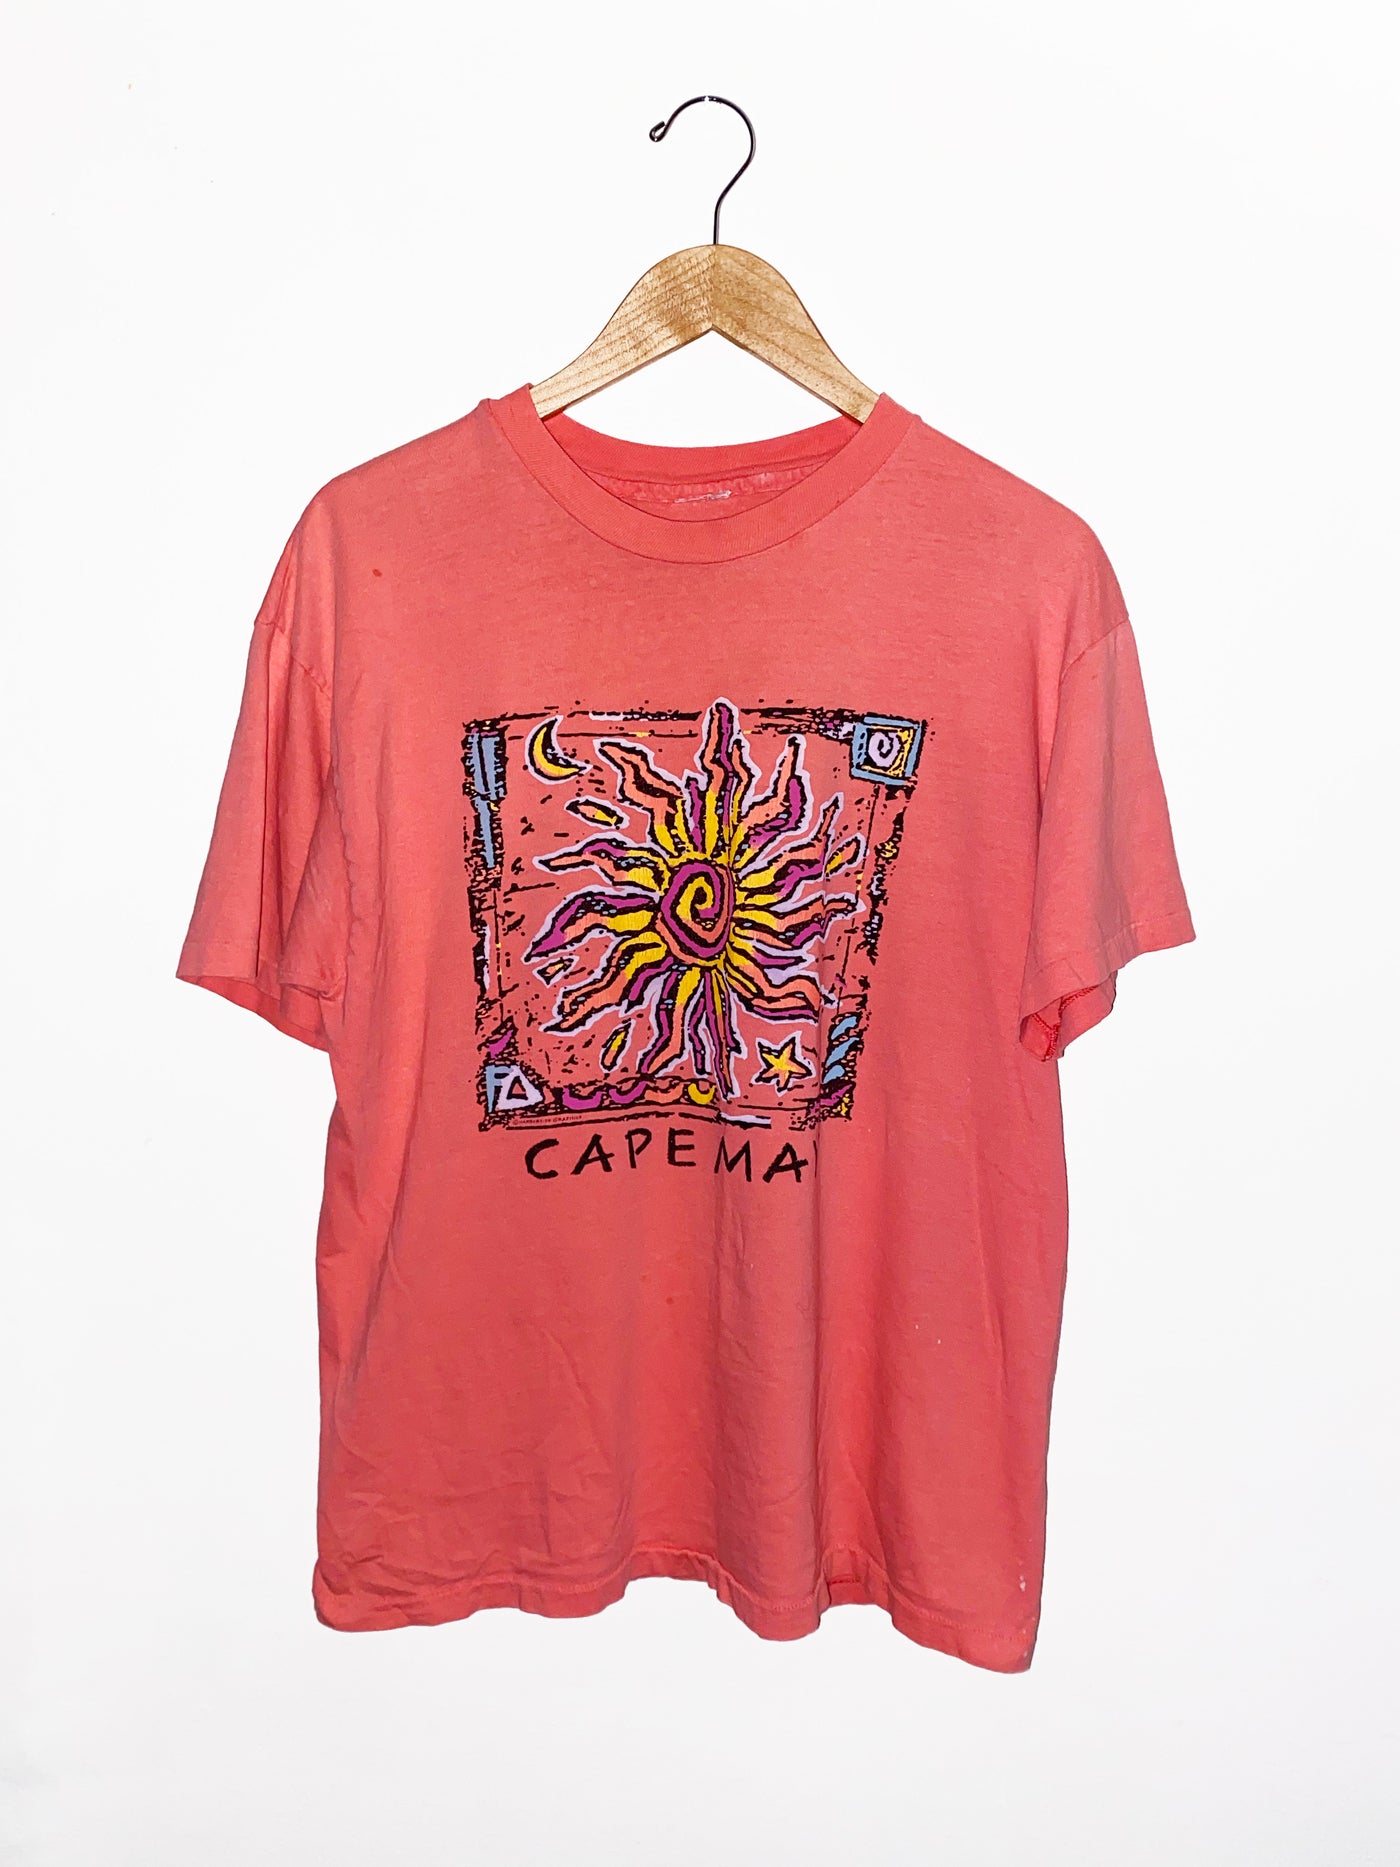 Vintage 90s Cape May Graphic T-Shirt